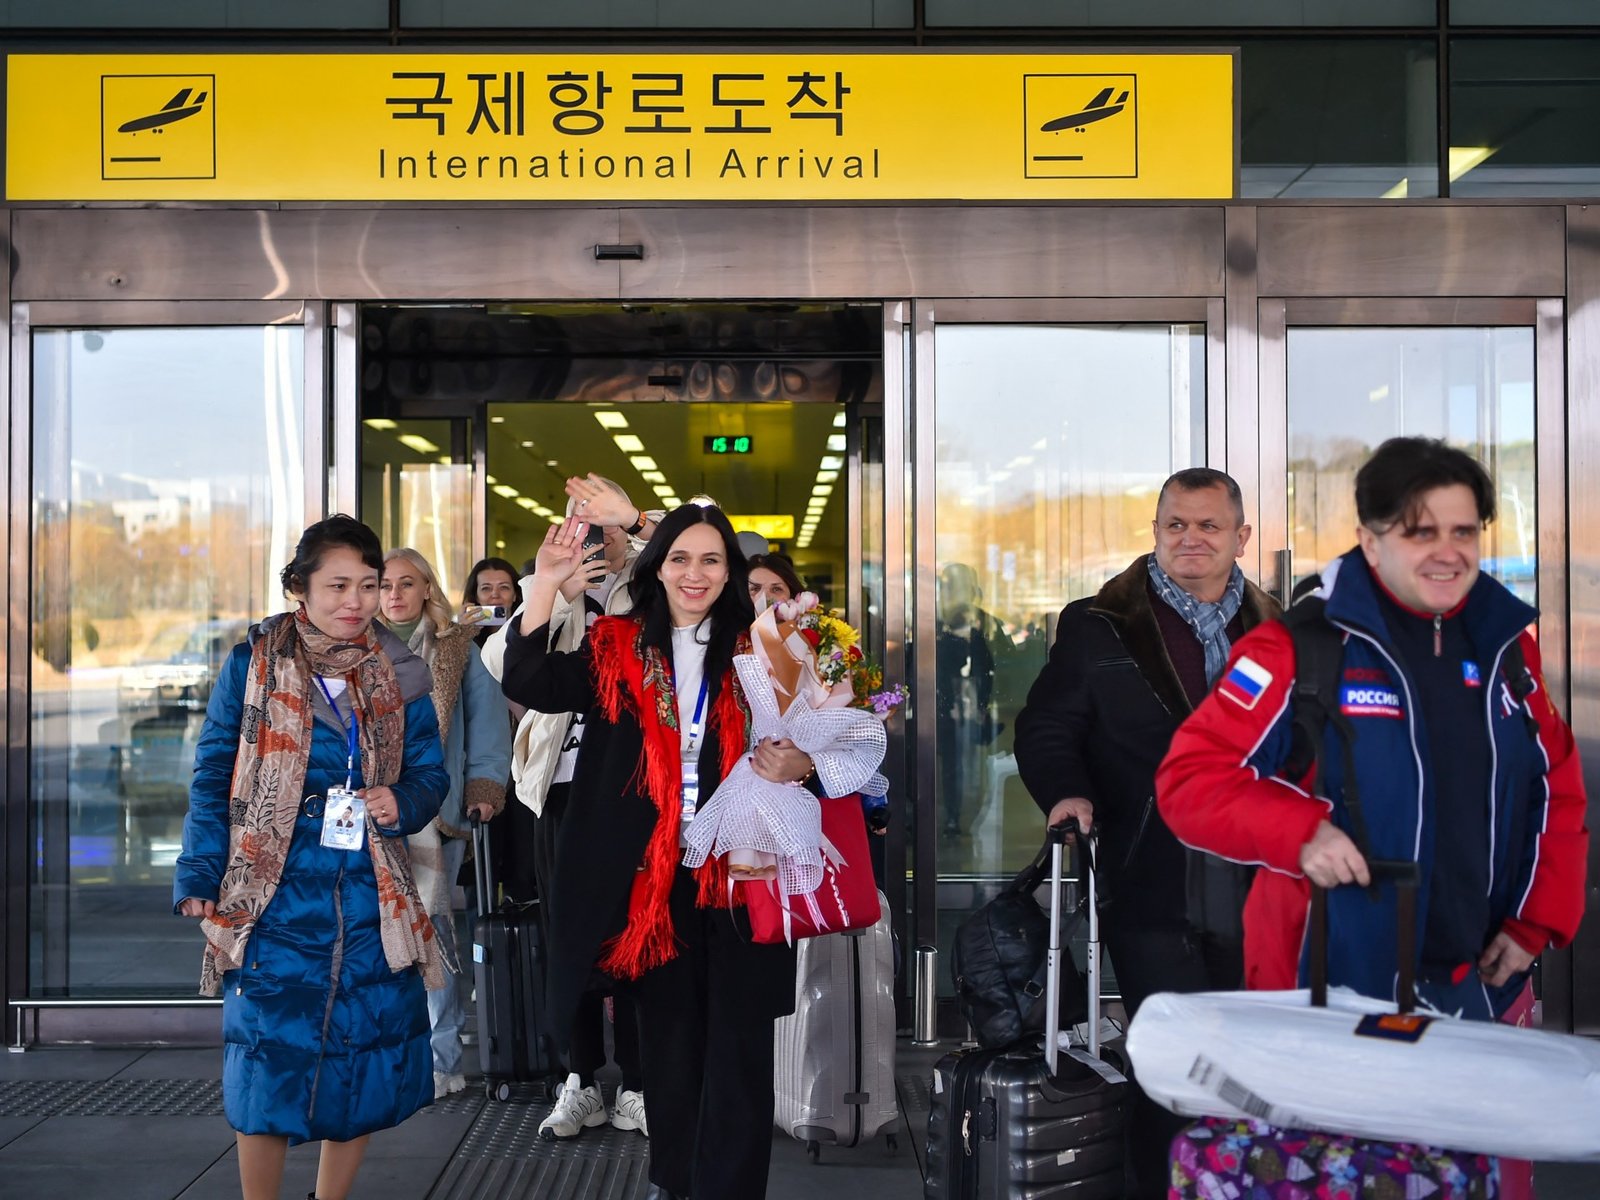 Russians arrive in North Korea as first foreign tour group since COVID-19 | Tourism News